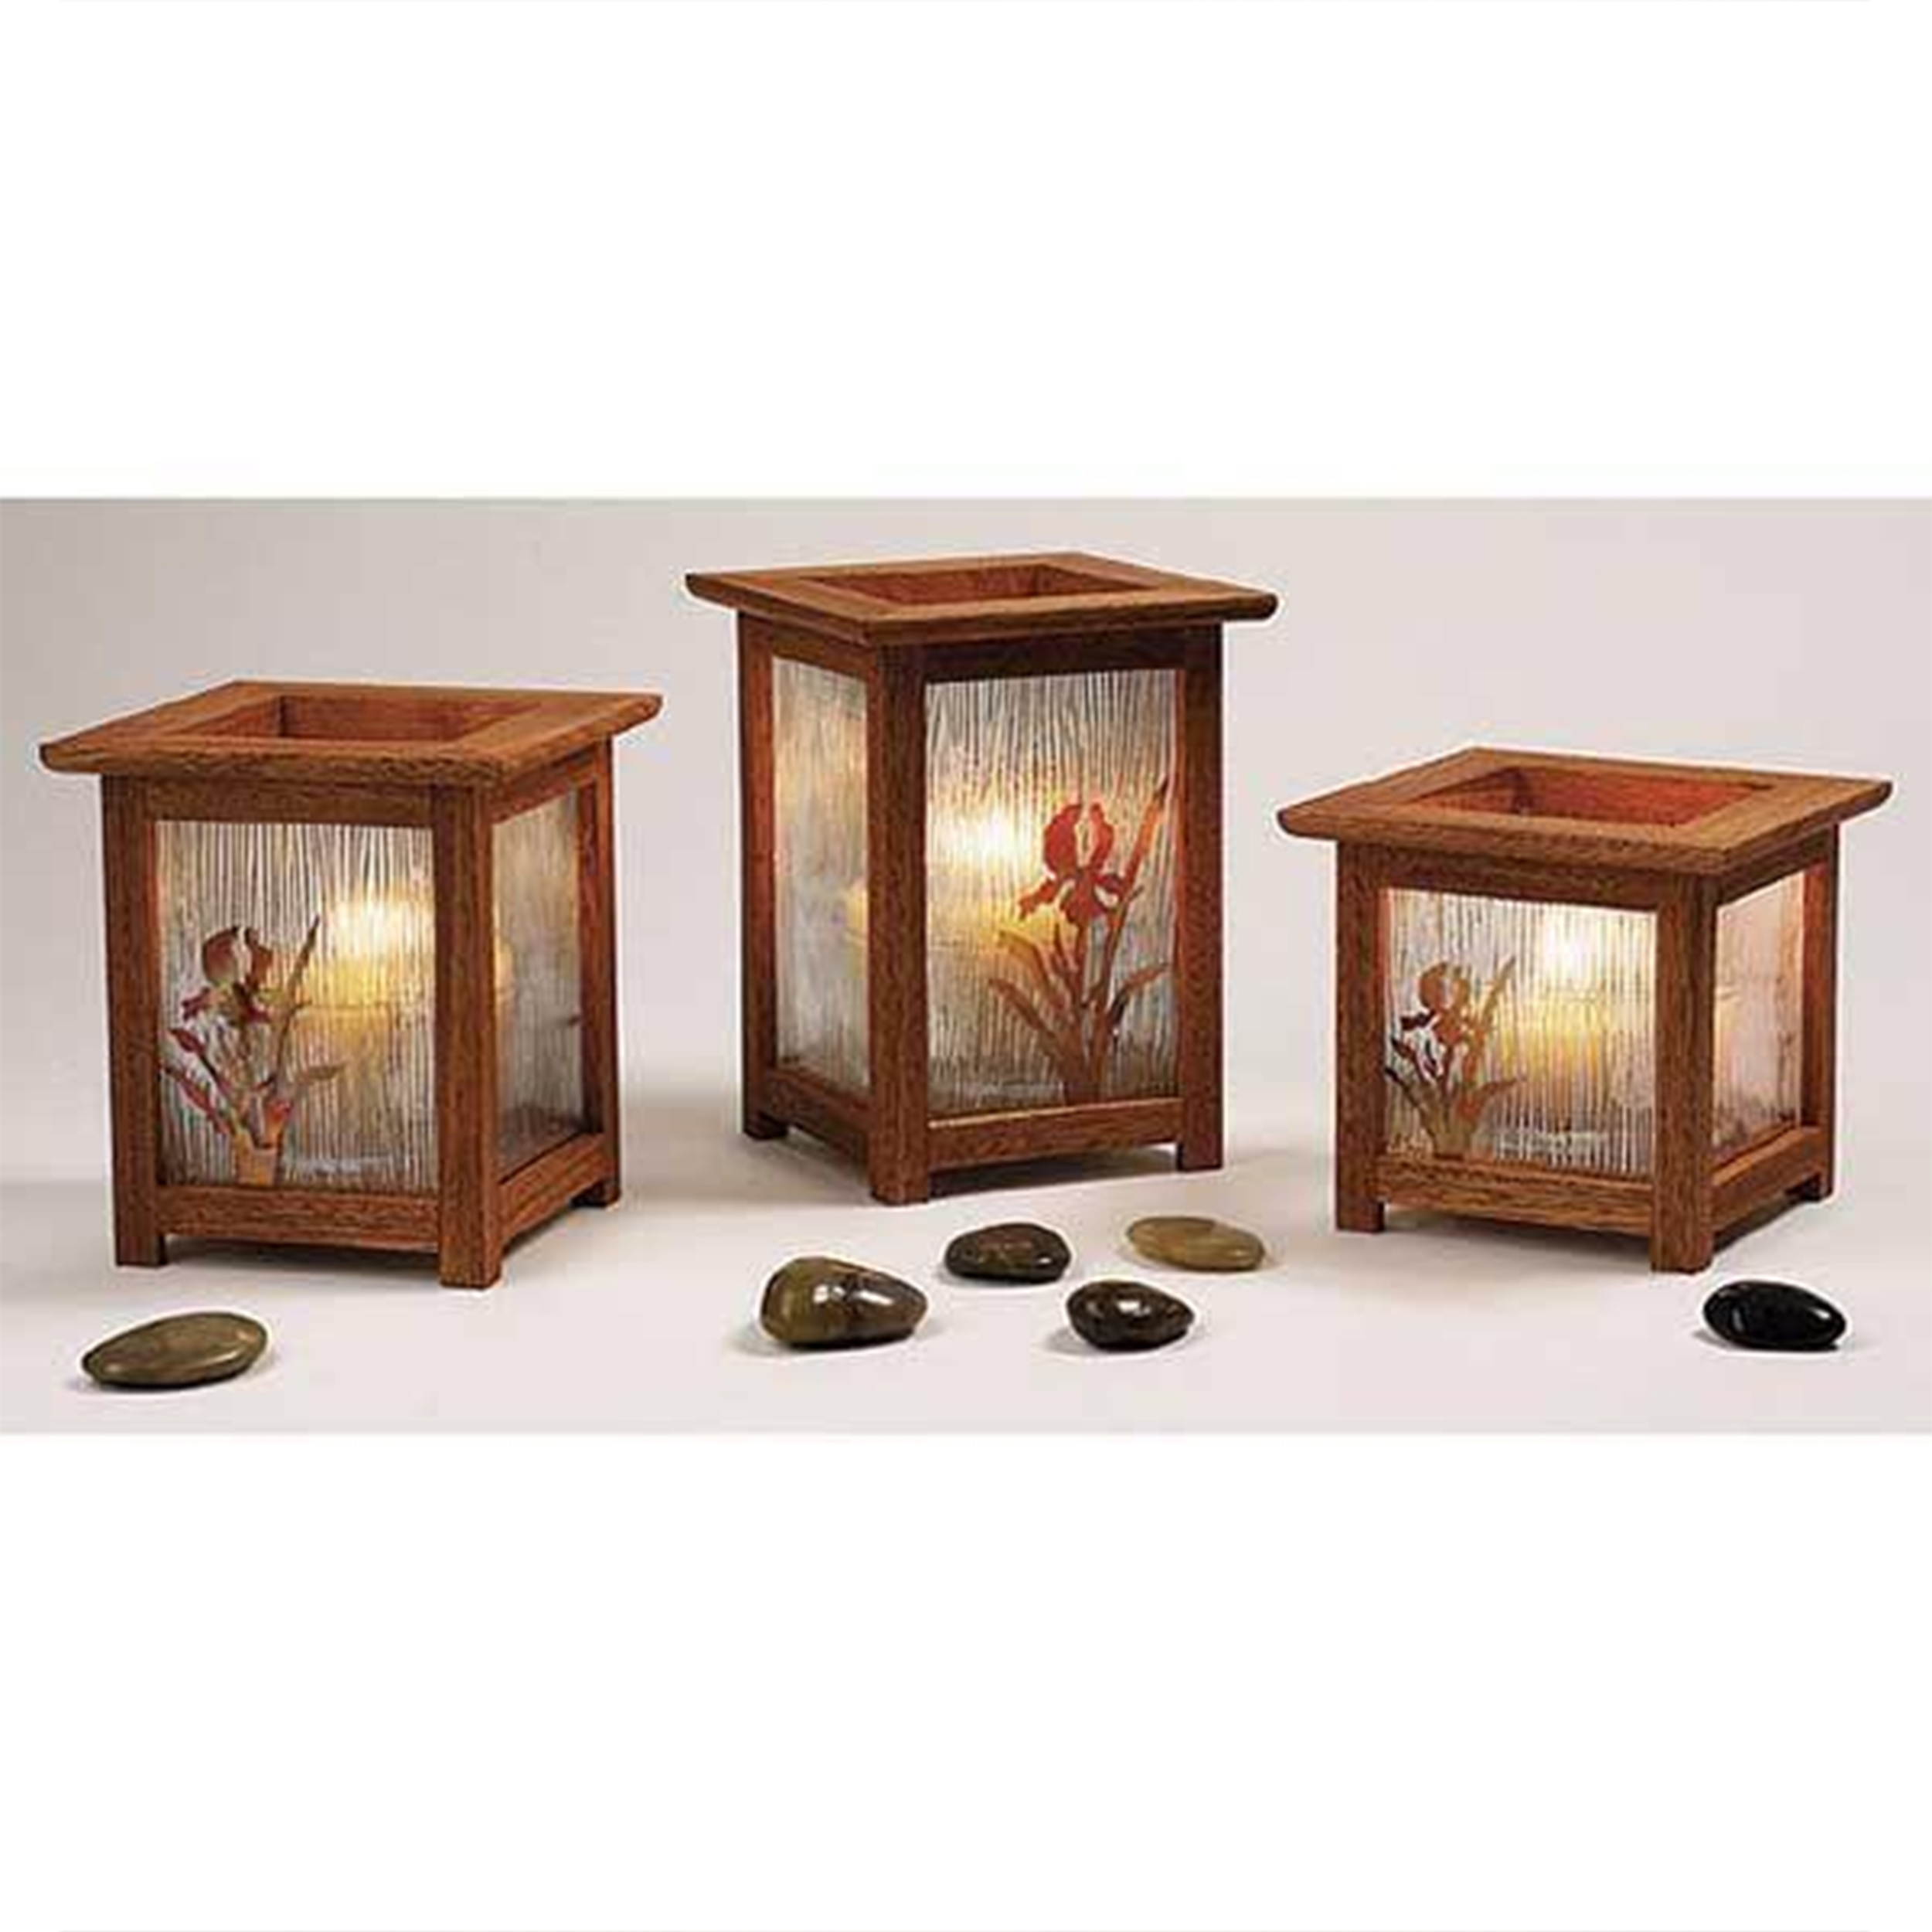 Downloadable Woodworking Project Plan To Build Arts And Crafts Candle Lanterns